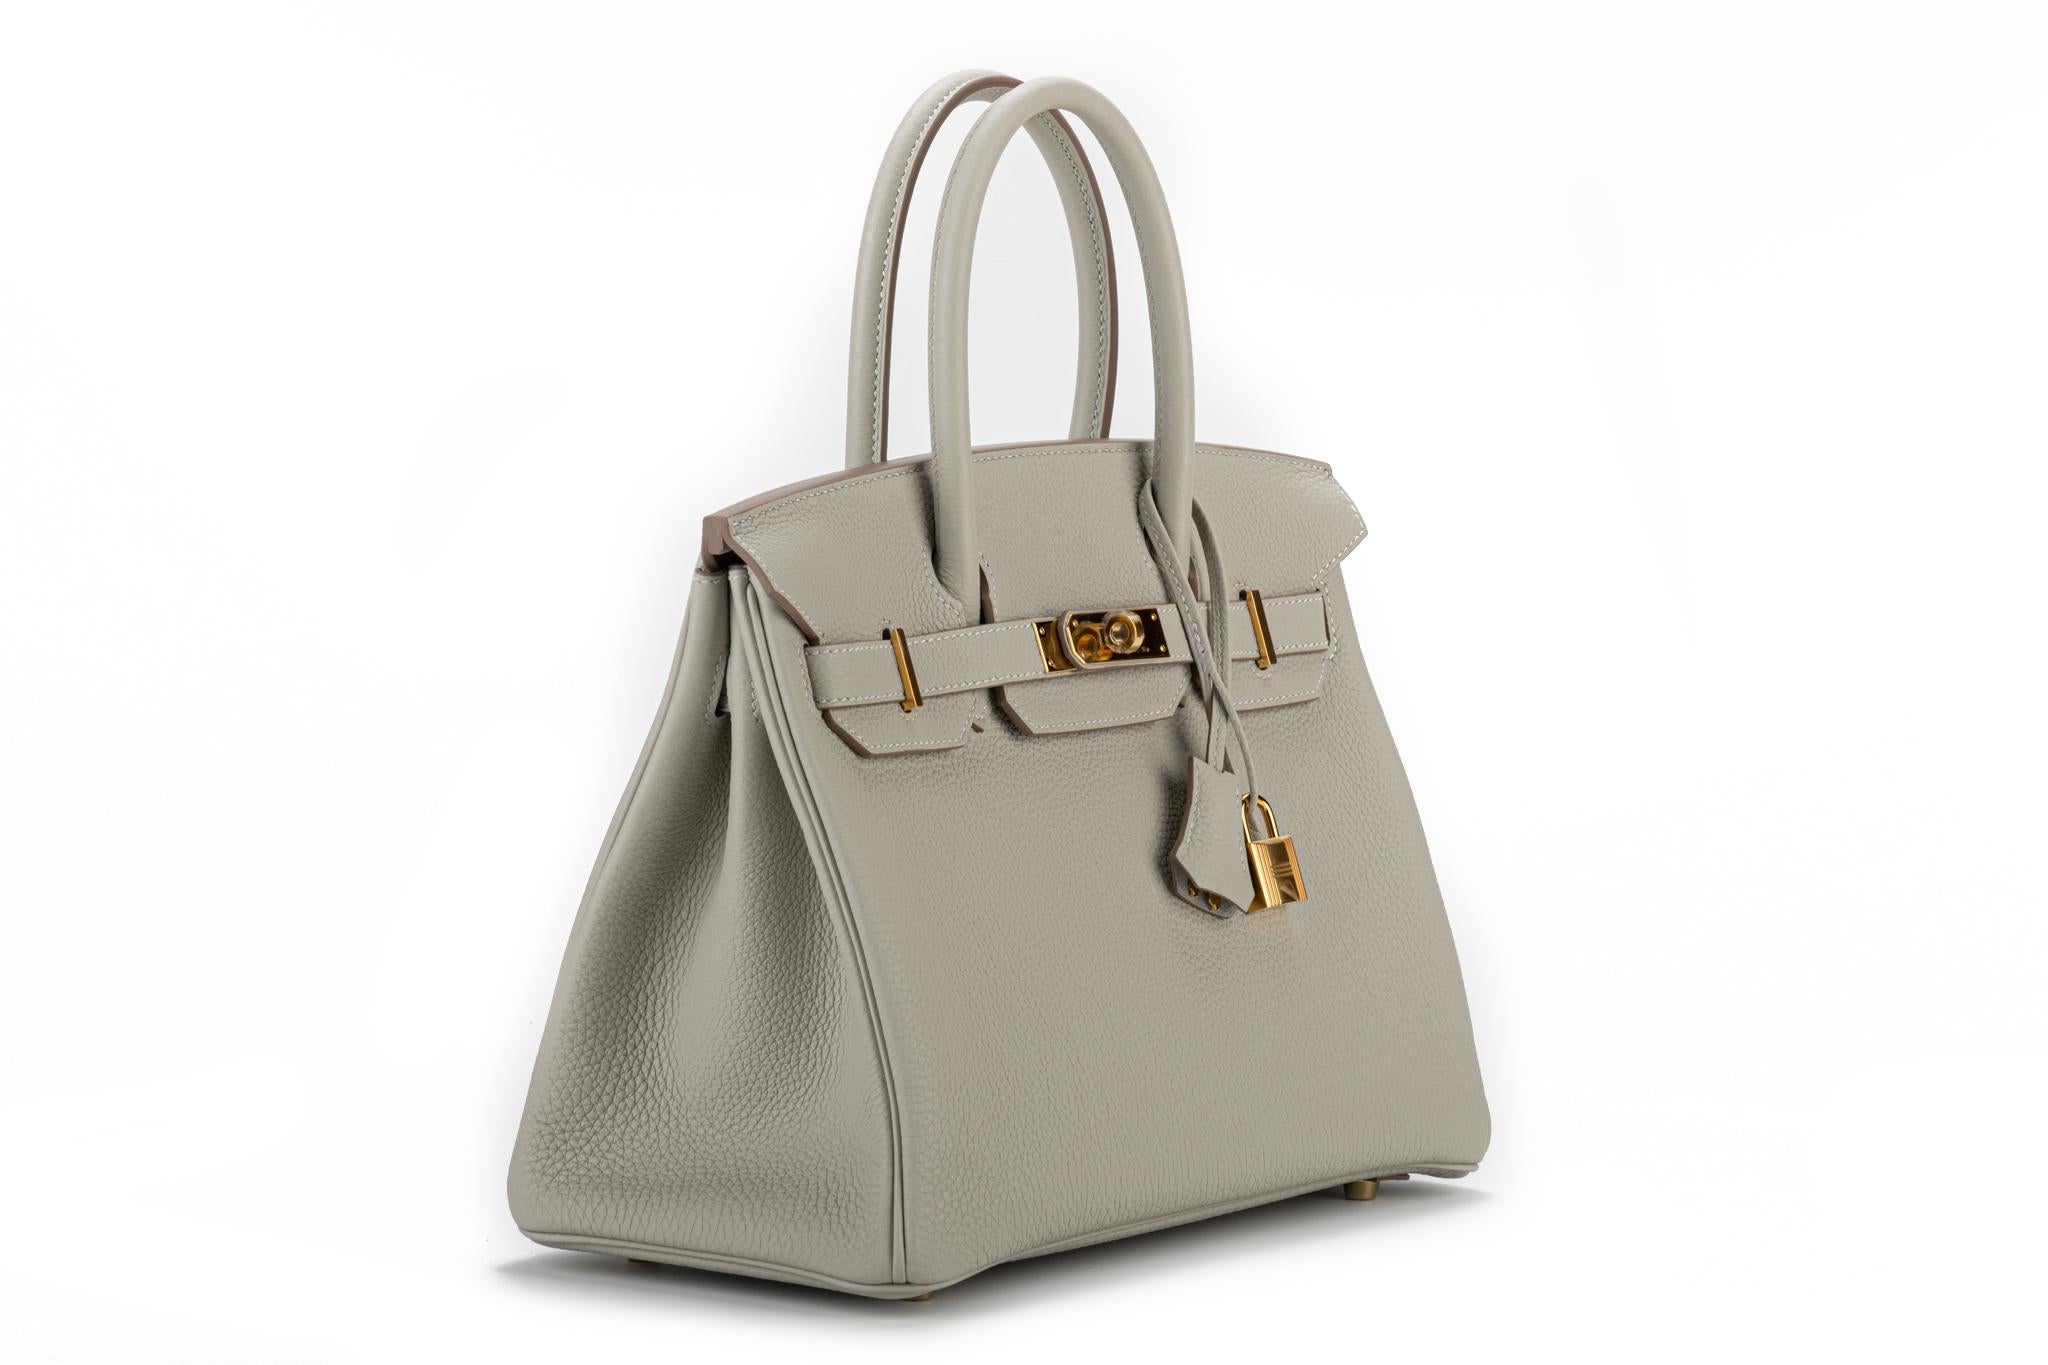 Hermès brand new in box 2020 Birkin bag 30 cm in gris perle togo leather with gold tone hardware. Handle drop, 4